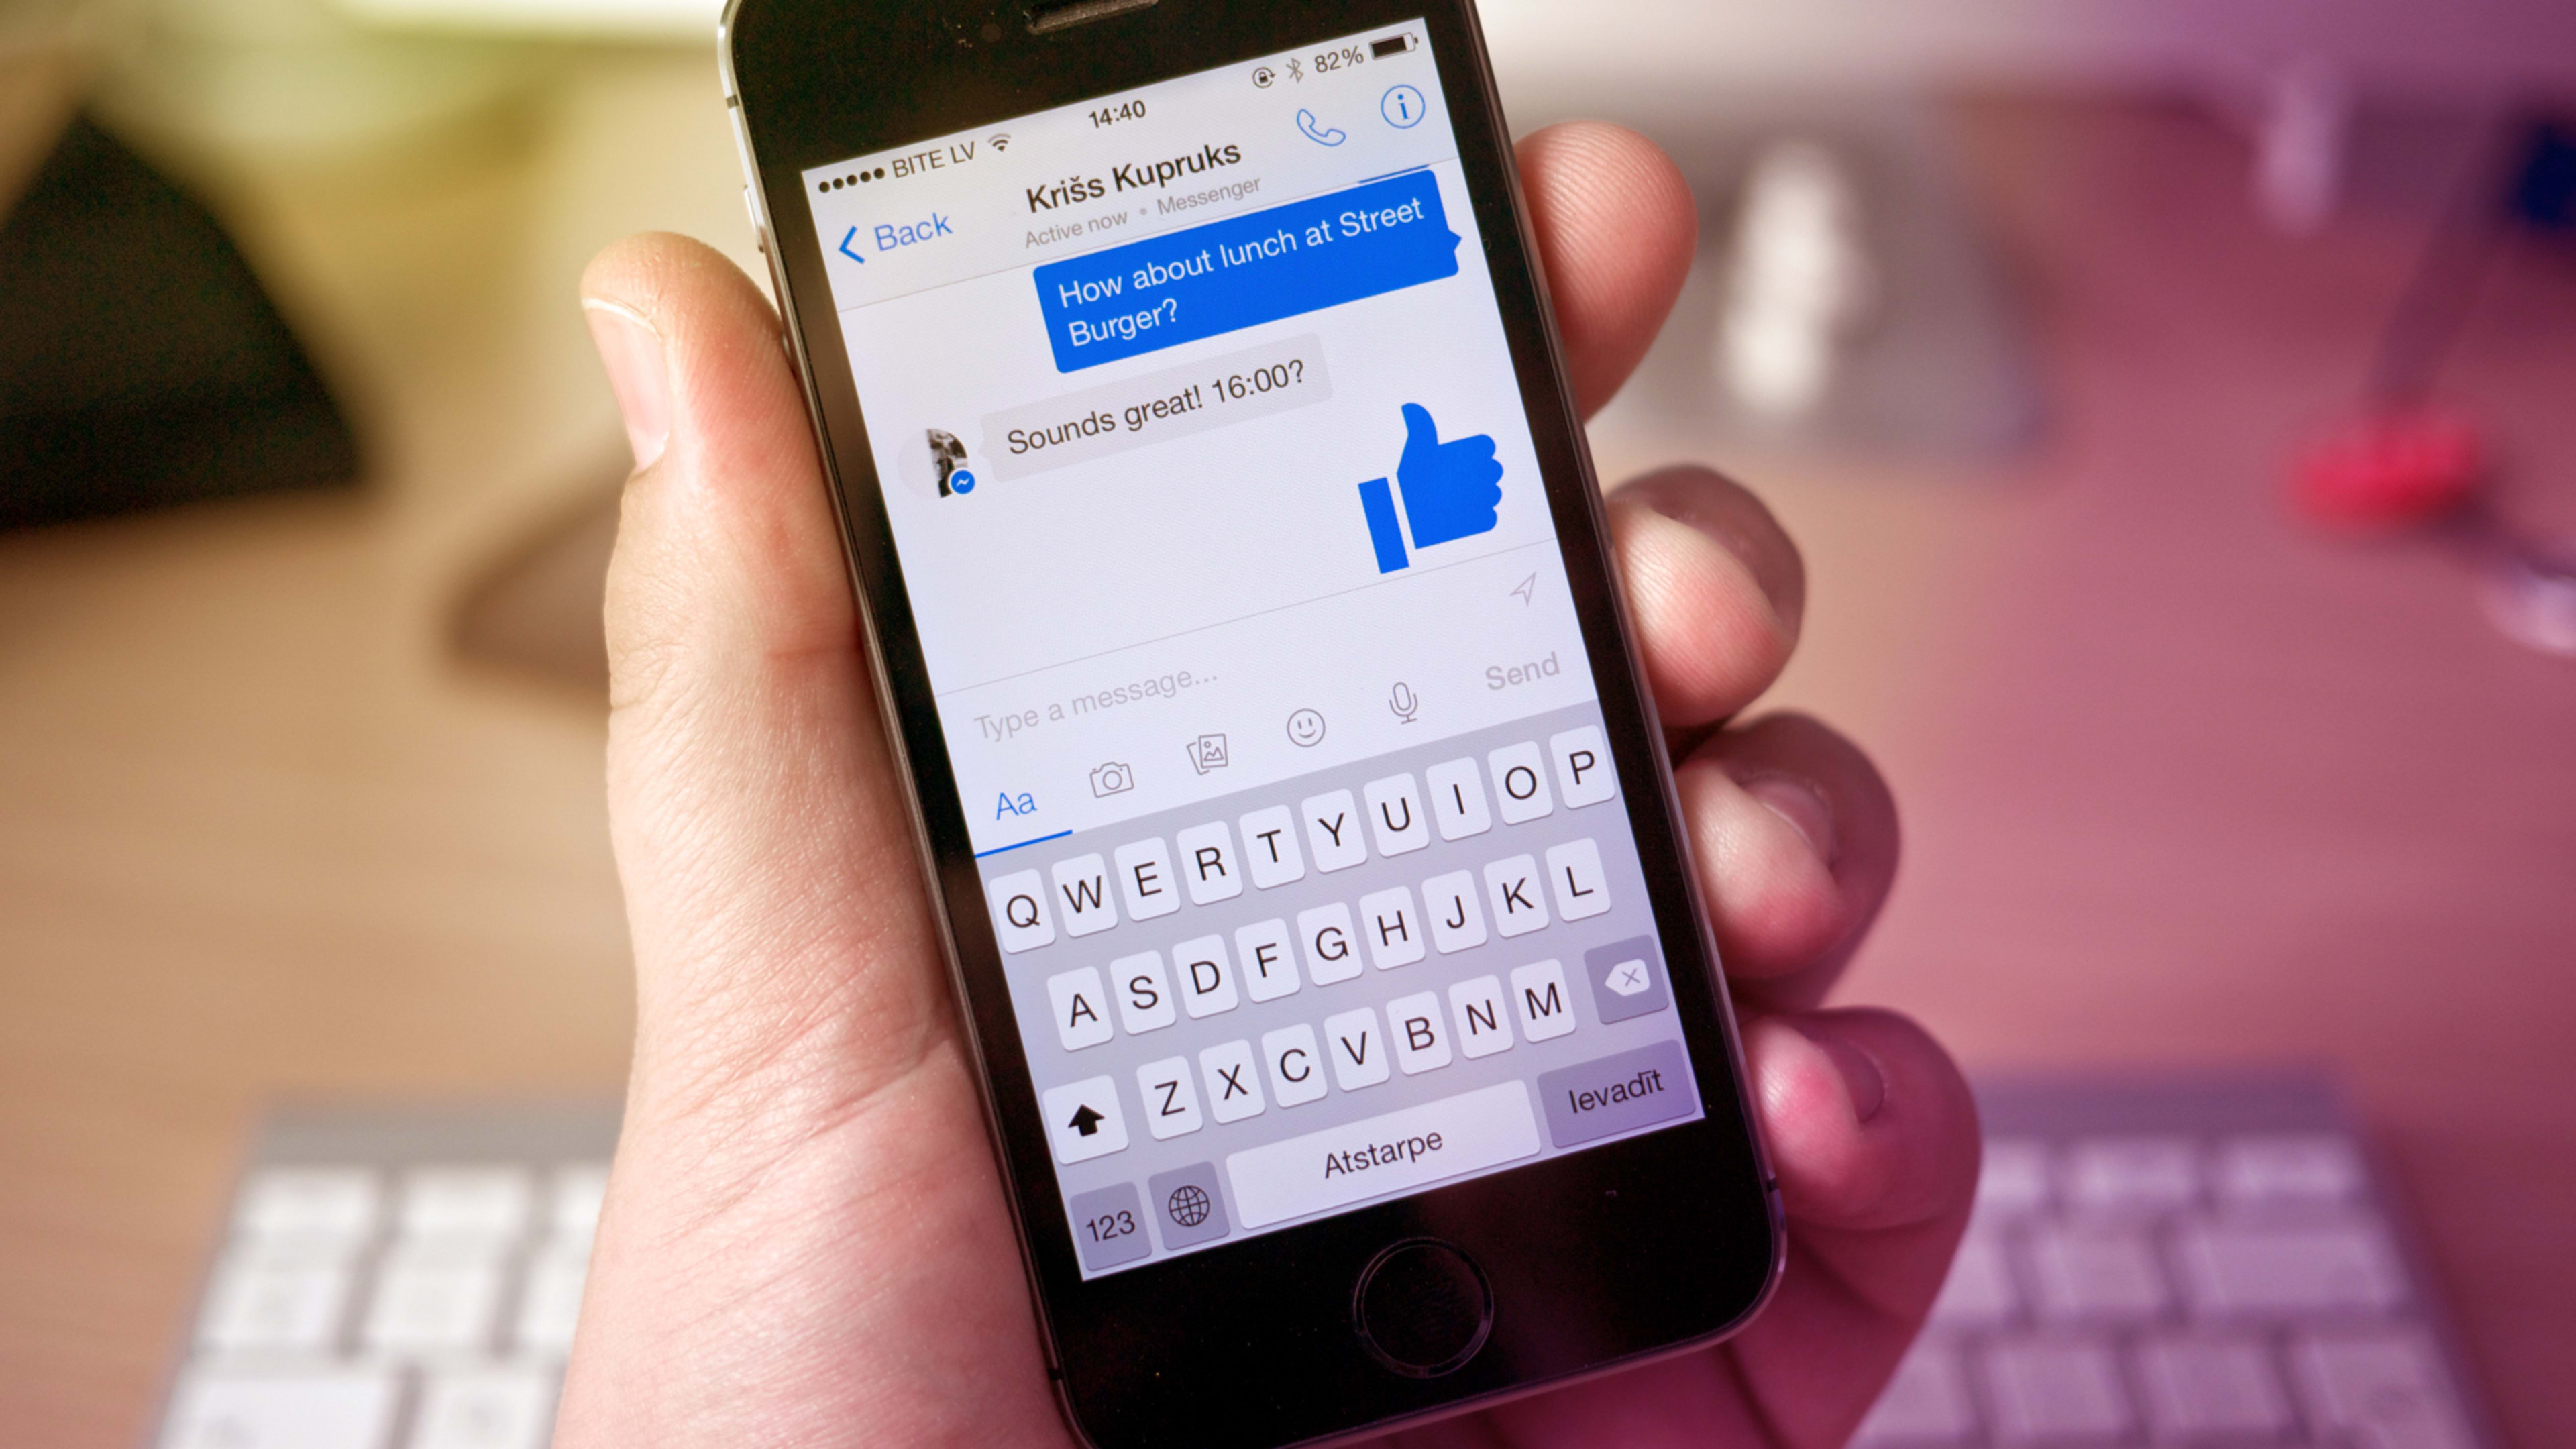 Messenger makes it easy to let folks into group chat (or keep ’em out)